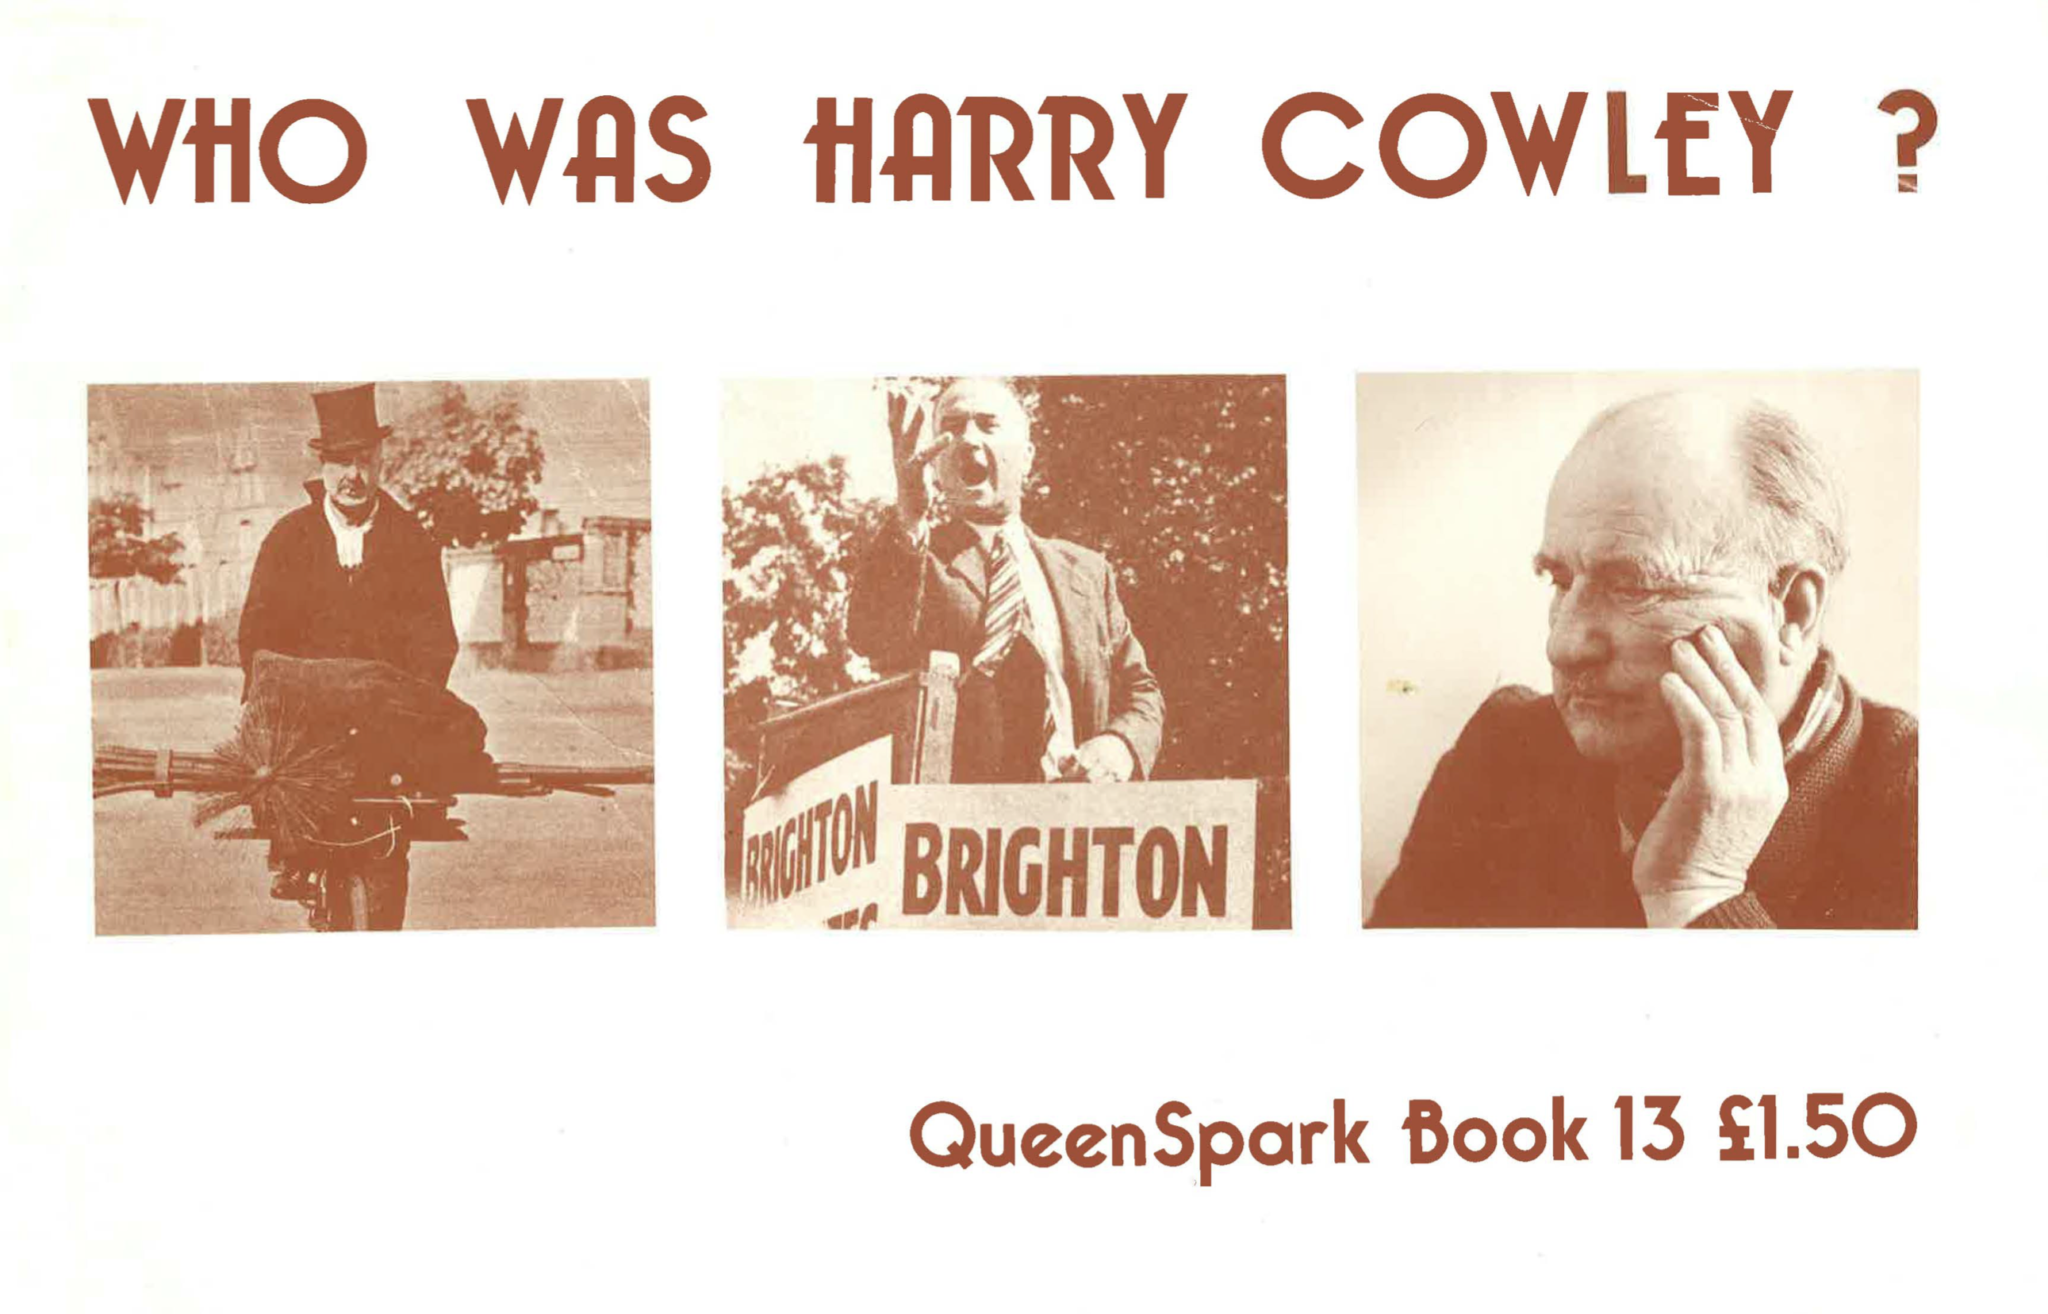 Read the Harry Cowley book (some dated racial language)